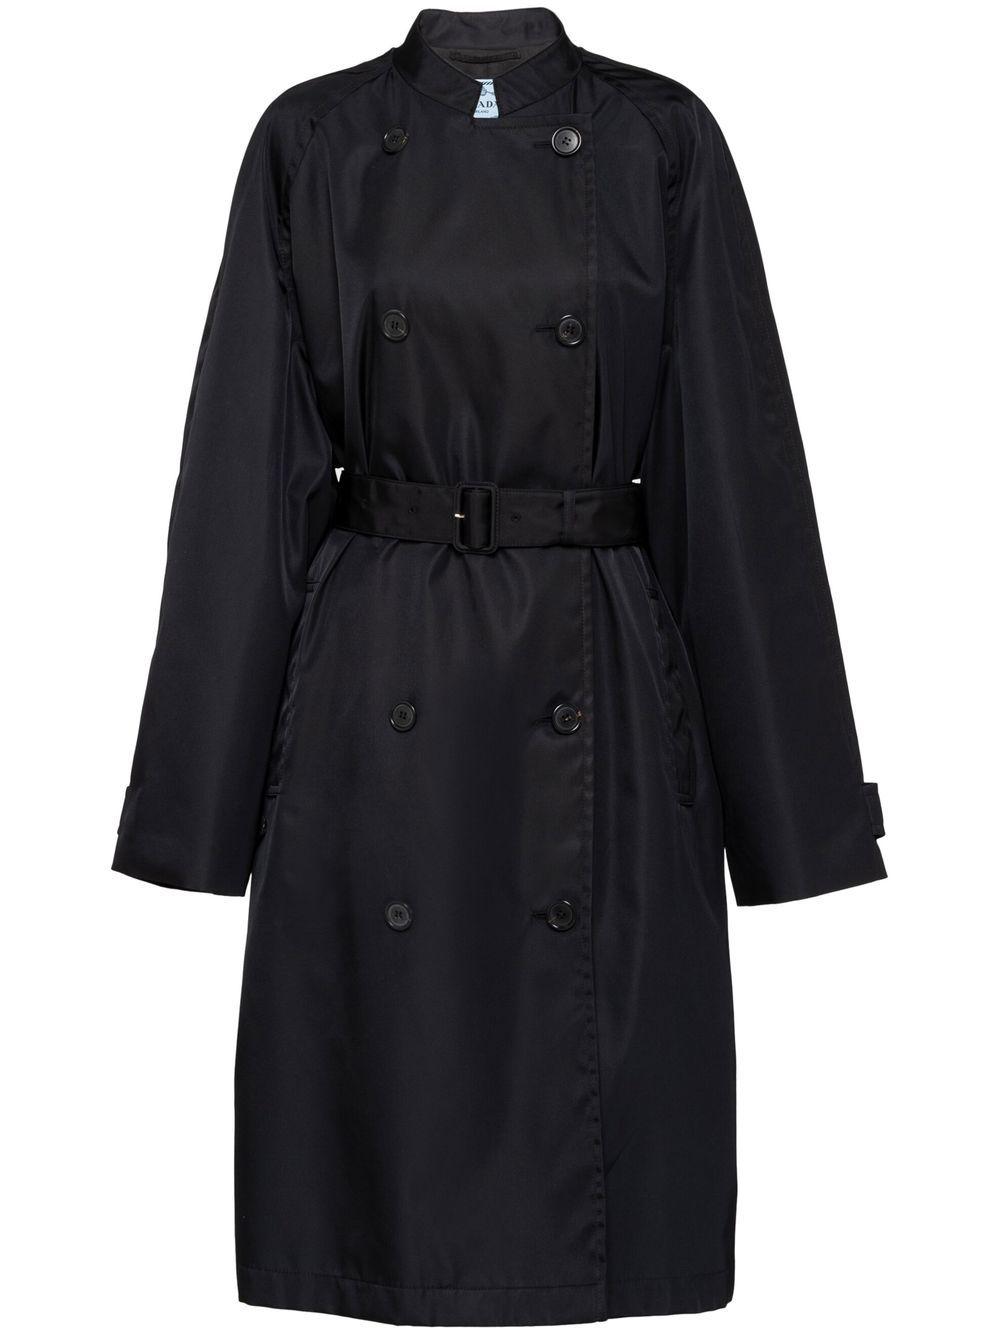 Prada Double-breasted Trench Coat in Black | Lyst